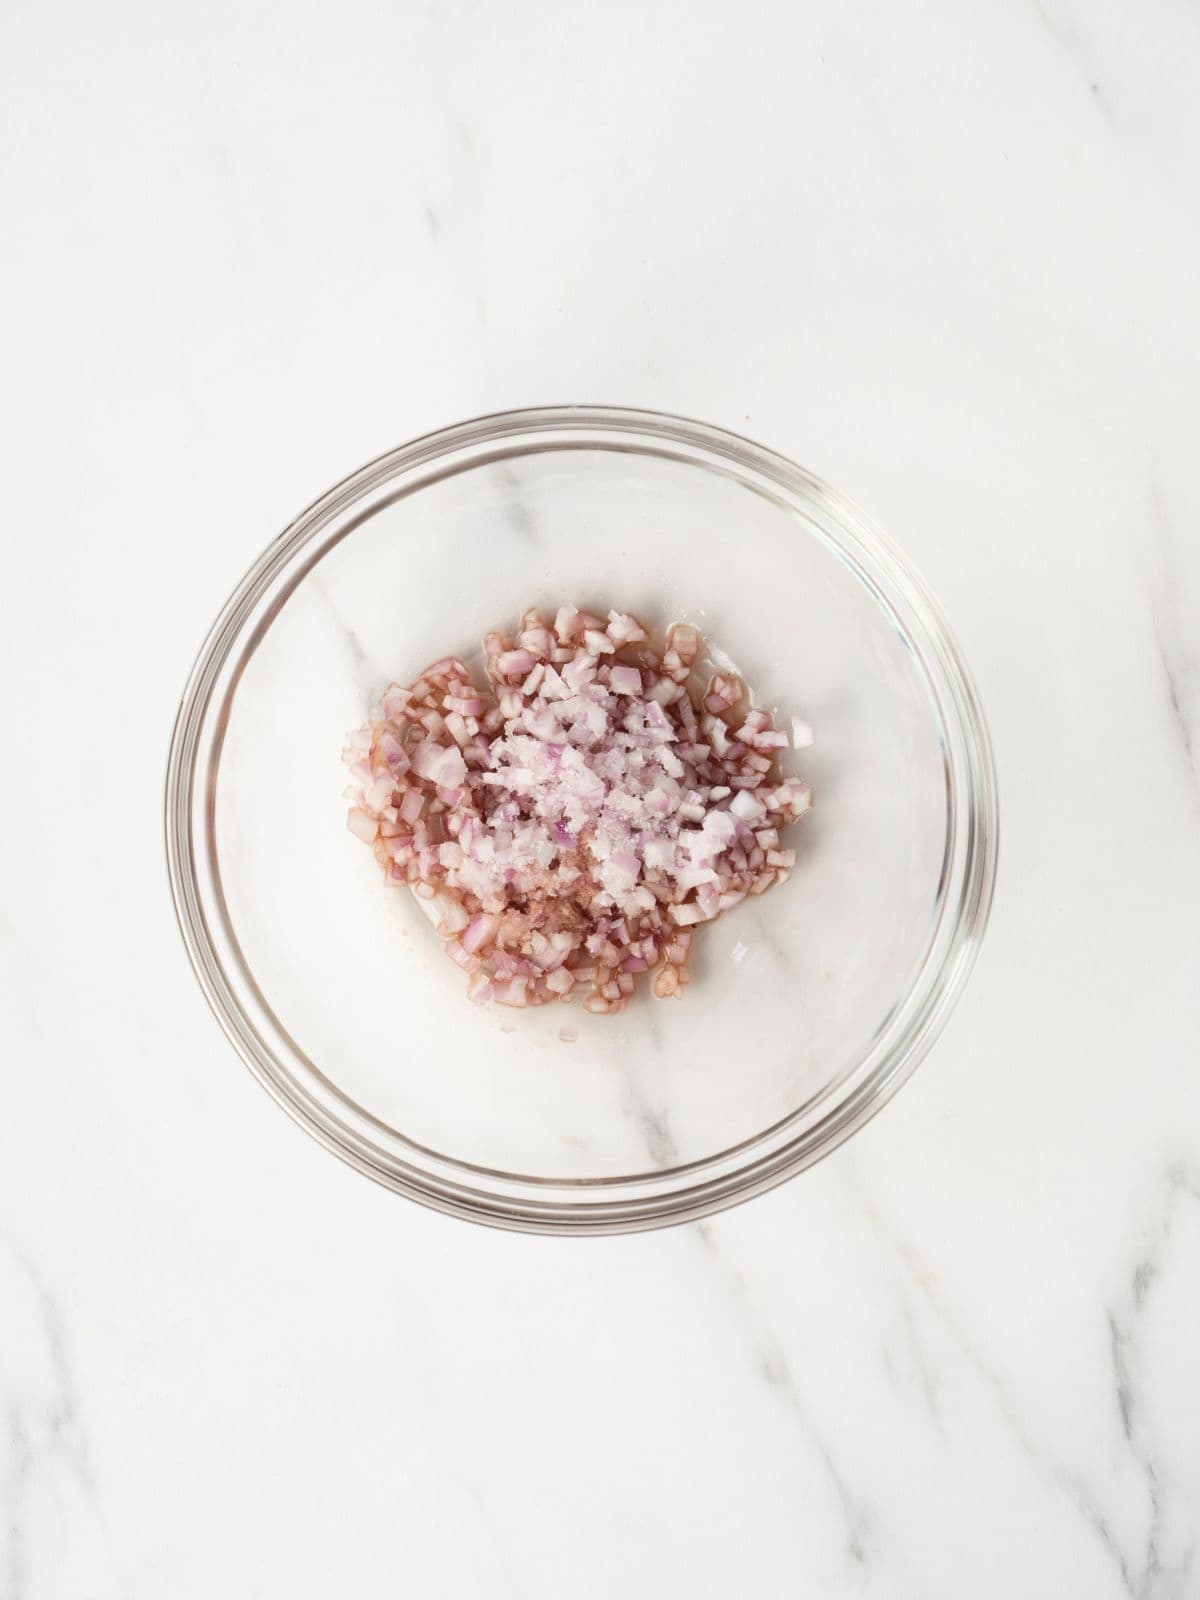 A small glass mixing bowl with finely chopped shallots and vinegar along with salt.